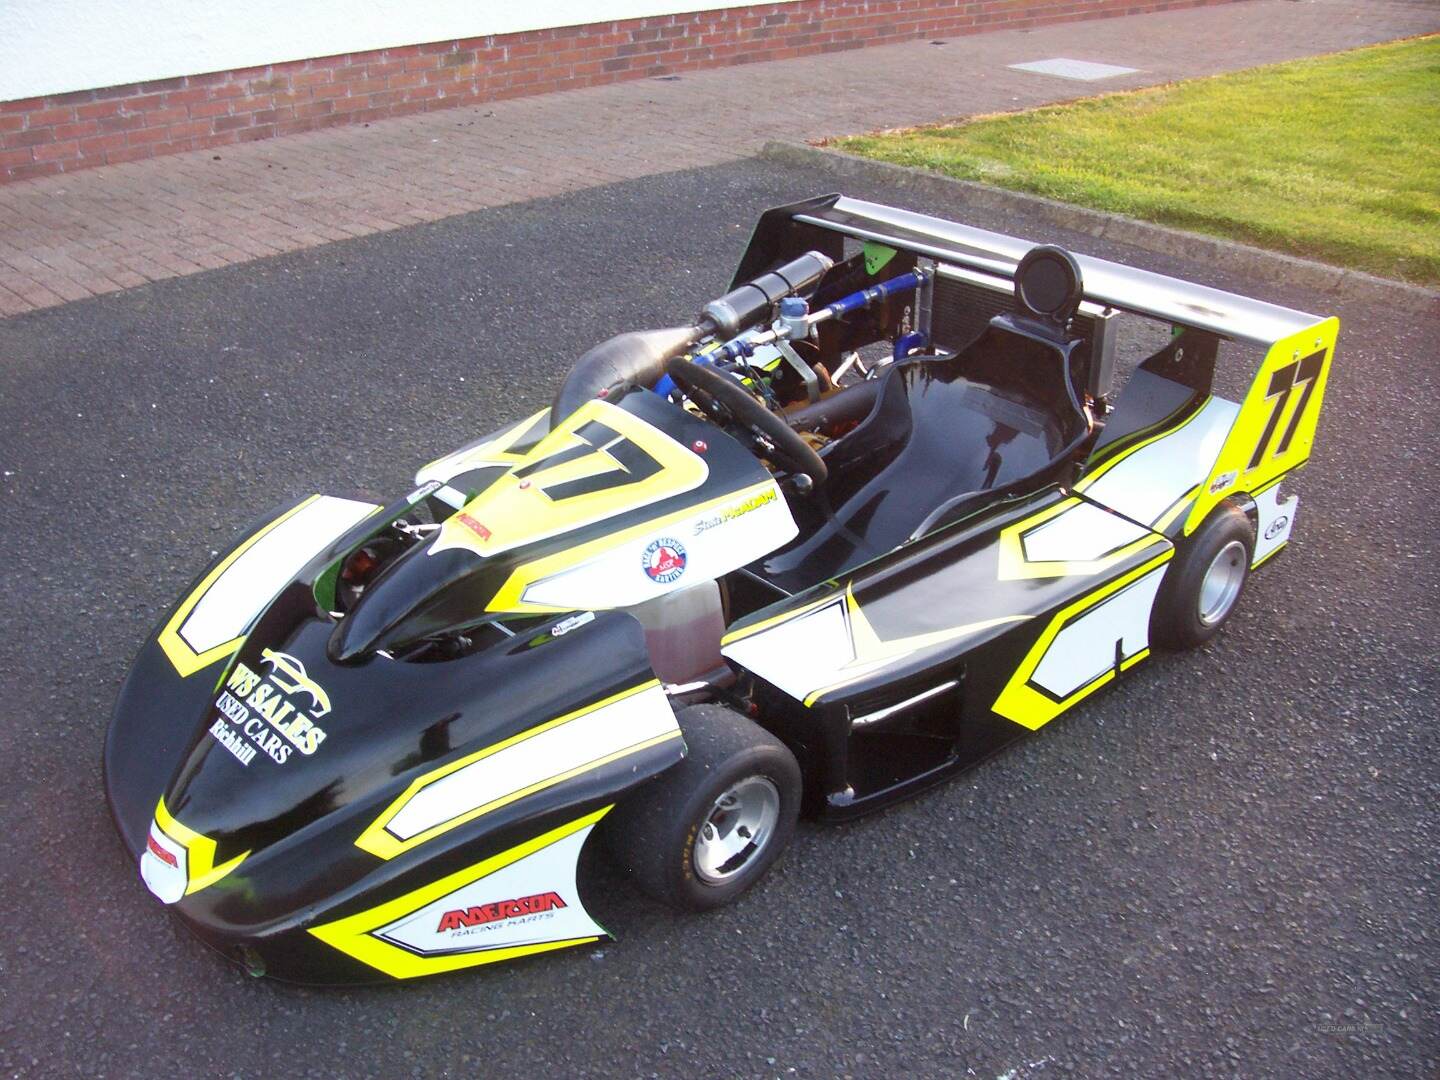 BMW GS series ANDERSON PVP SUPERKART. in Armagh